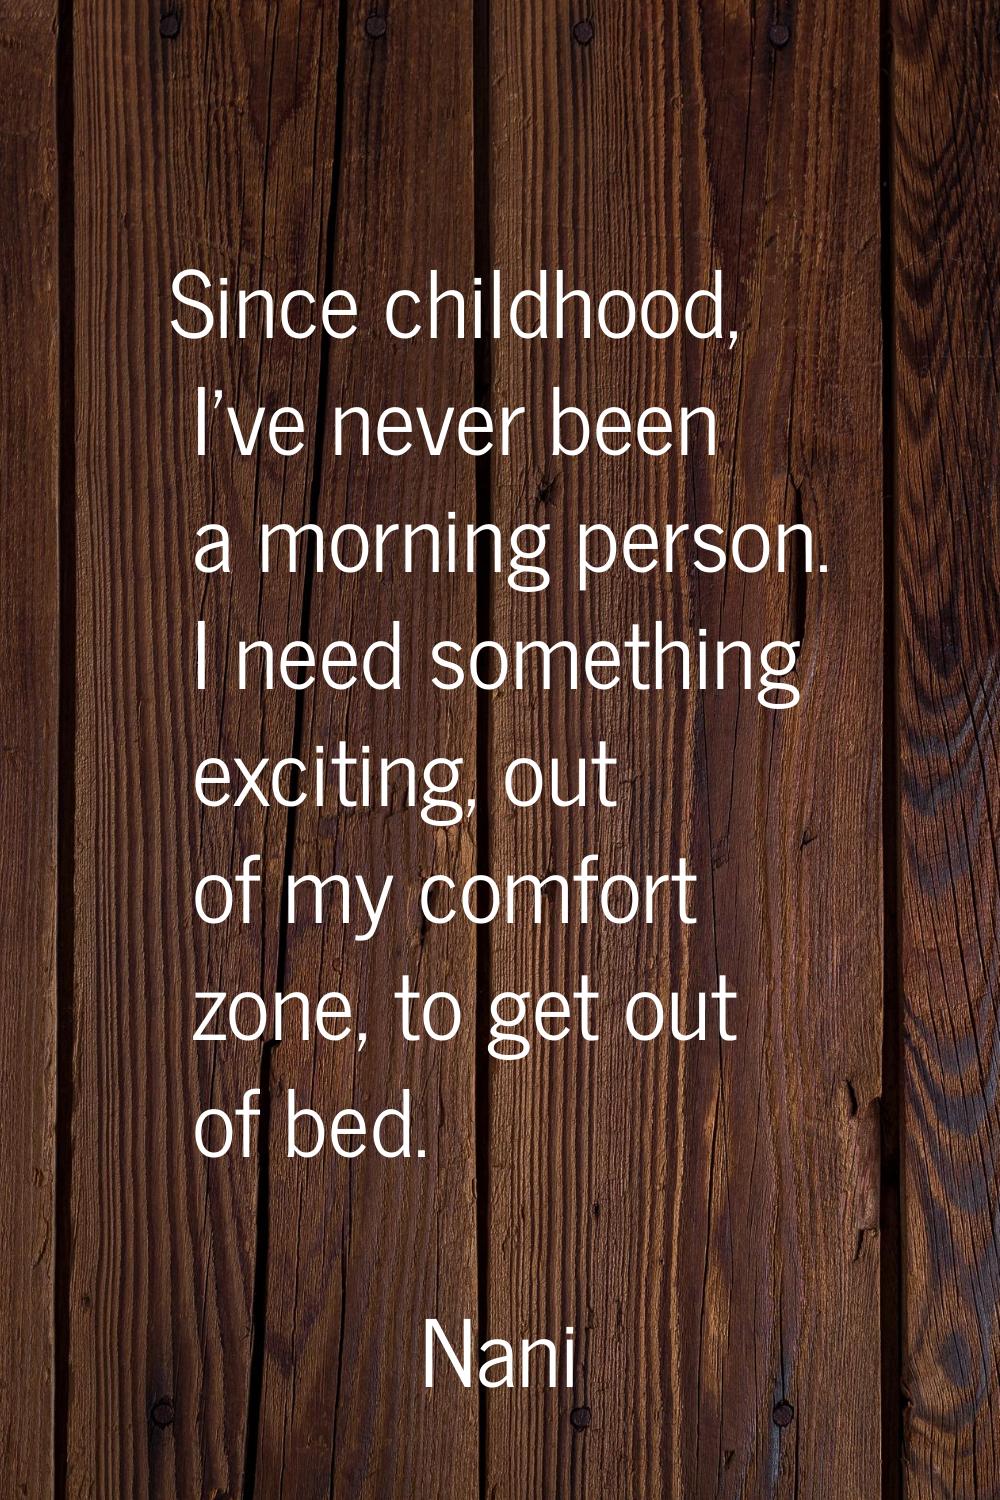 Since childhood, I've never been a morning person. I need something exciting, out of my comfort zon